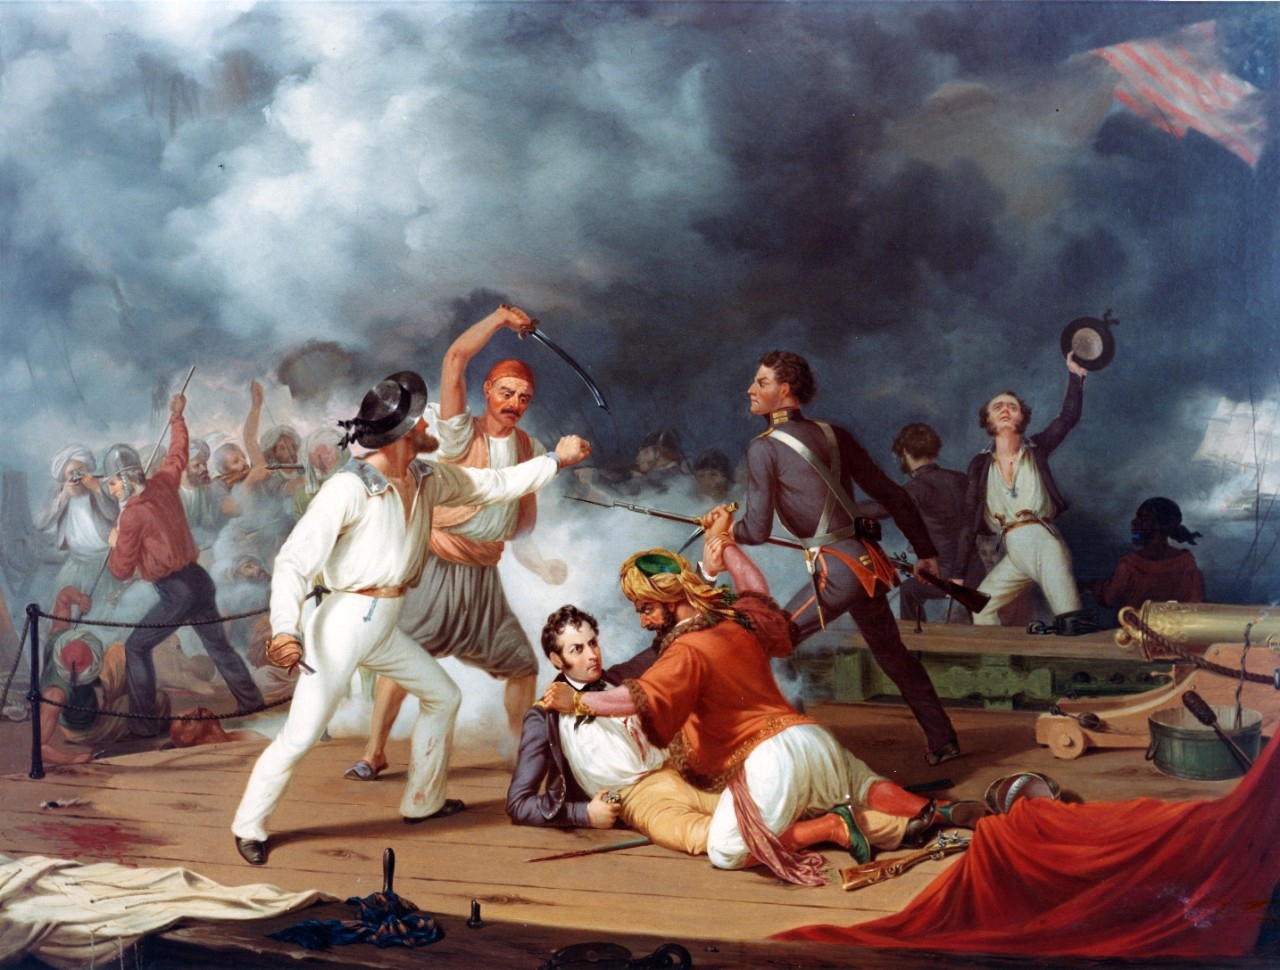 "Stephen Decatur's Conflict with the Algerine at Tripoli" during the boarding of a Tripolitan gunboat on 3 August 1804. Oil over print on canvas, 30” x 25”, by an unidentified artist, after Alonzo Chappell (1829-1887). Painting in the U.S. Naval Academy Museum Collection. Gift of Chester Dale, 1942. (Official U.S. Navy Photograph KN-10949)